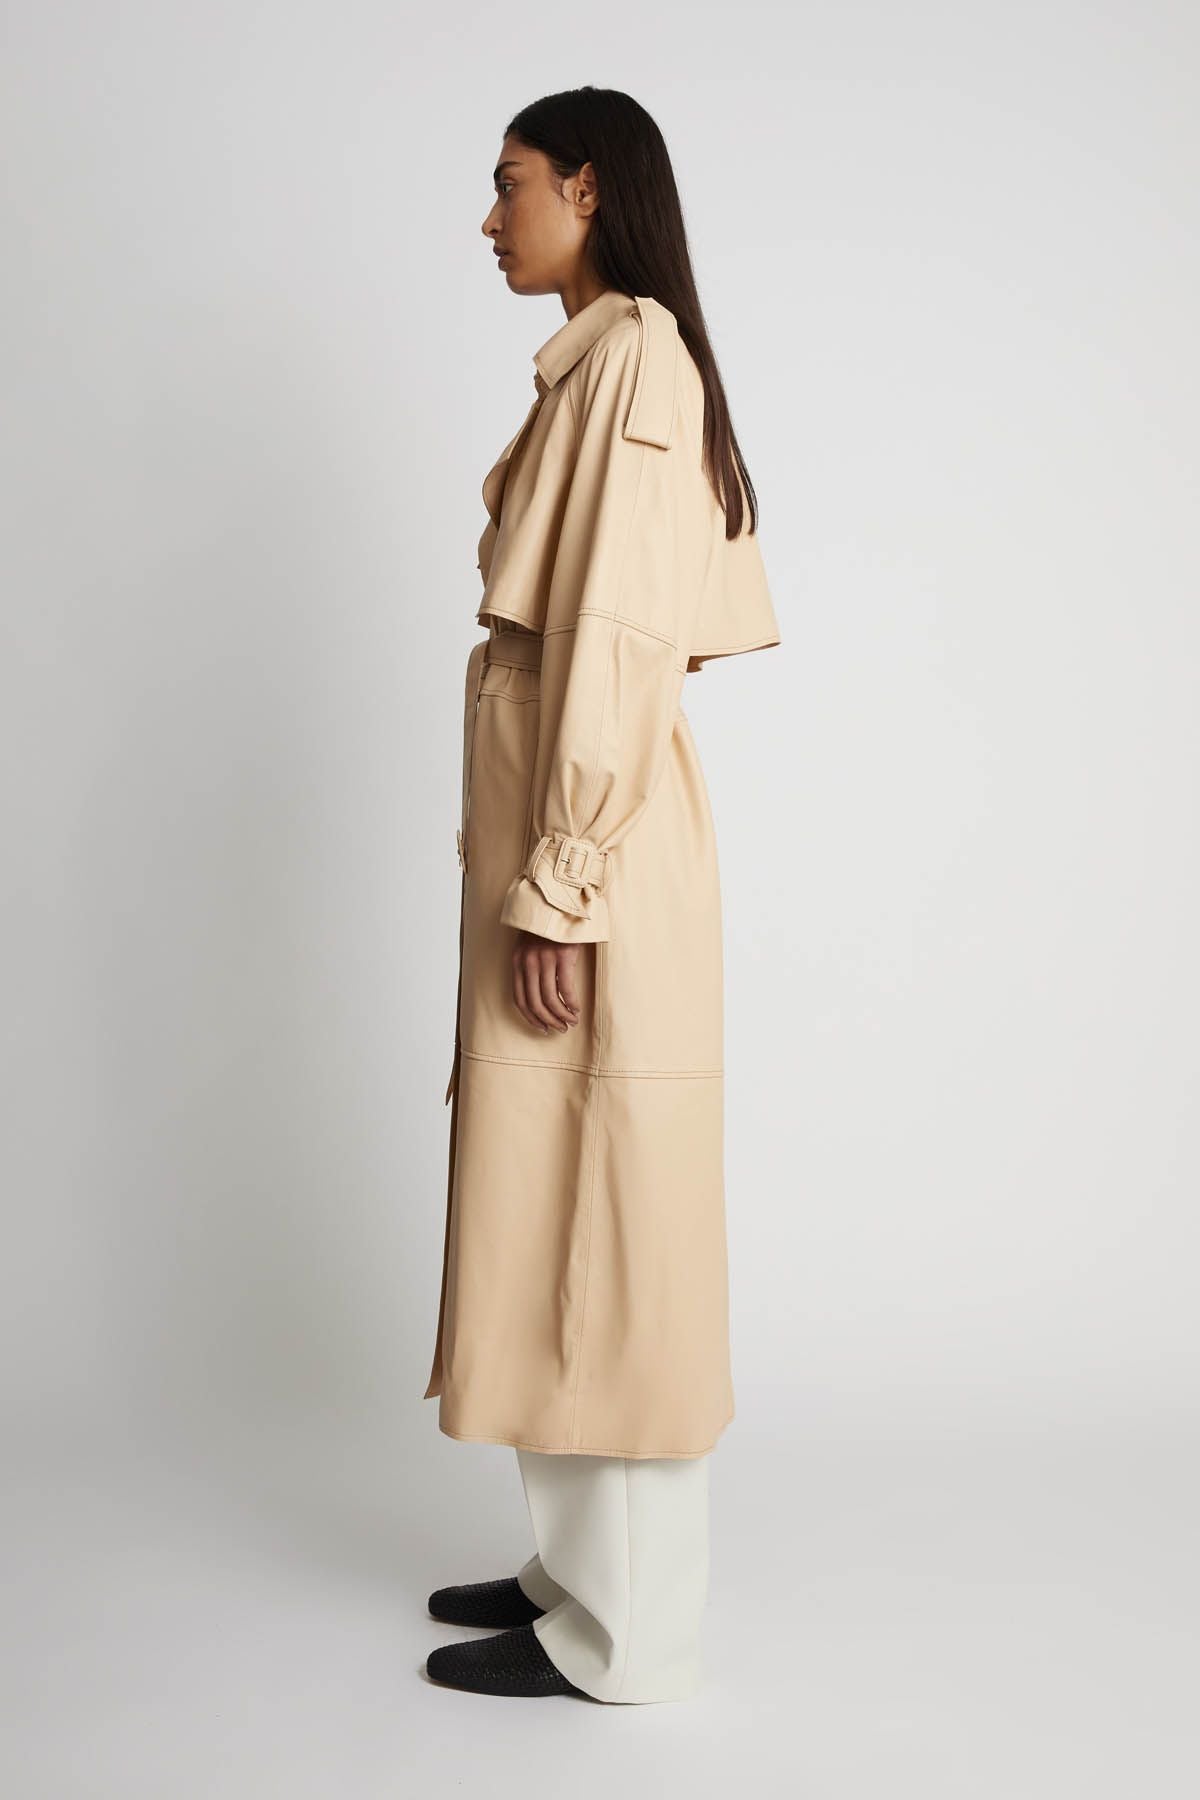 Jean Leather Trench - Cream